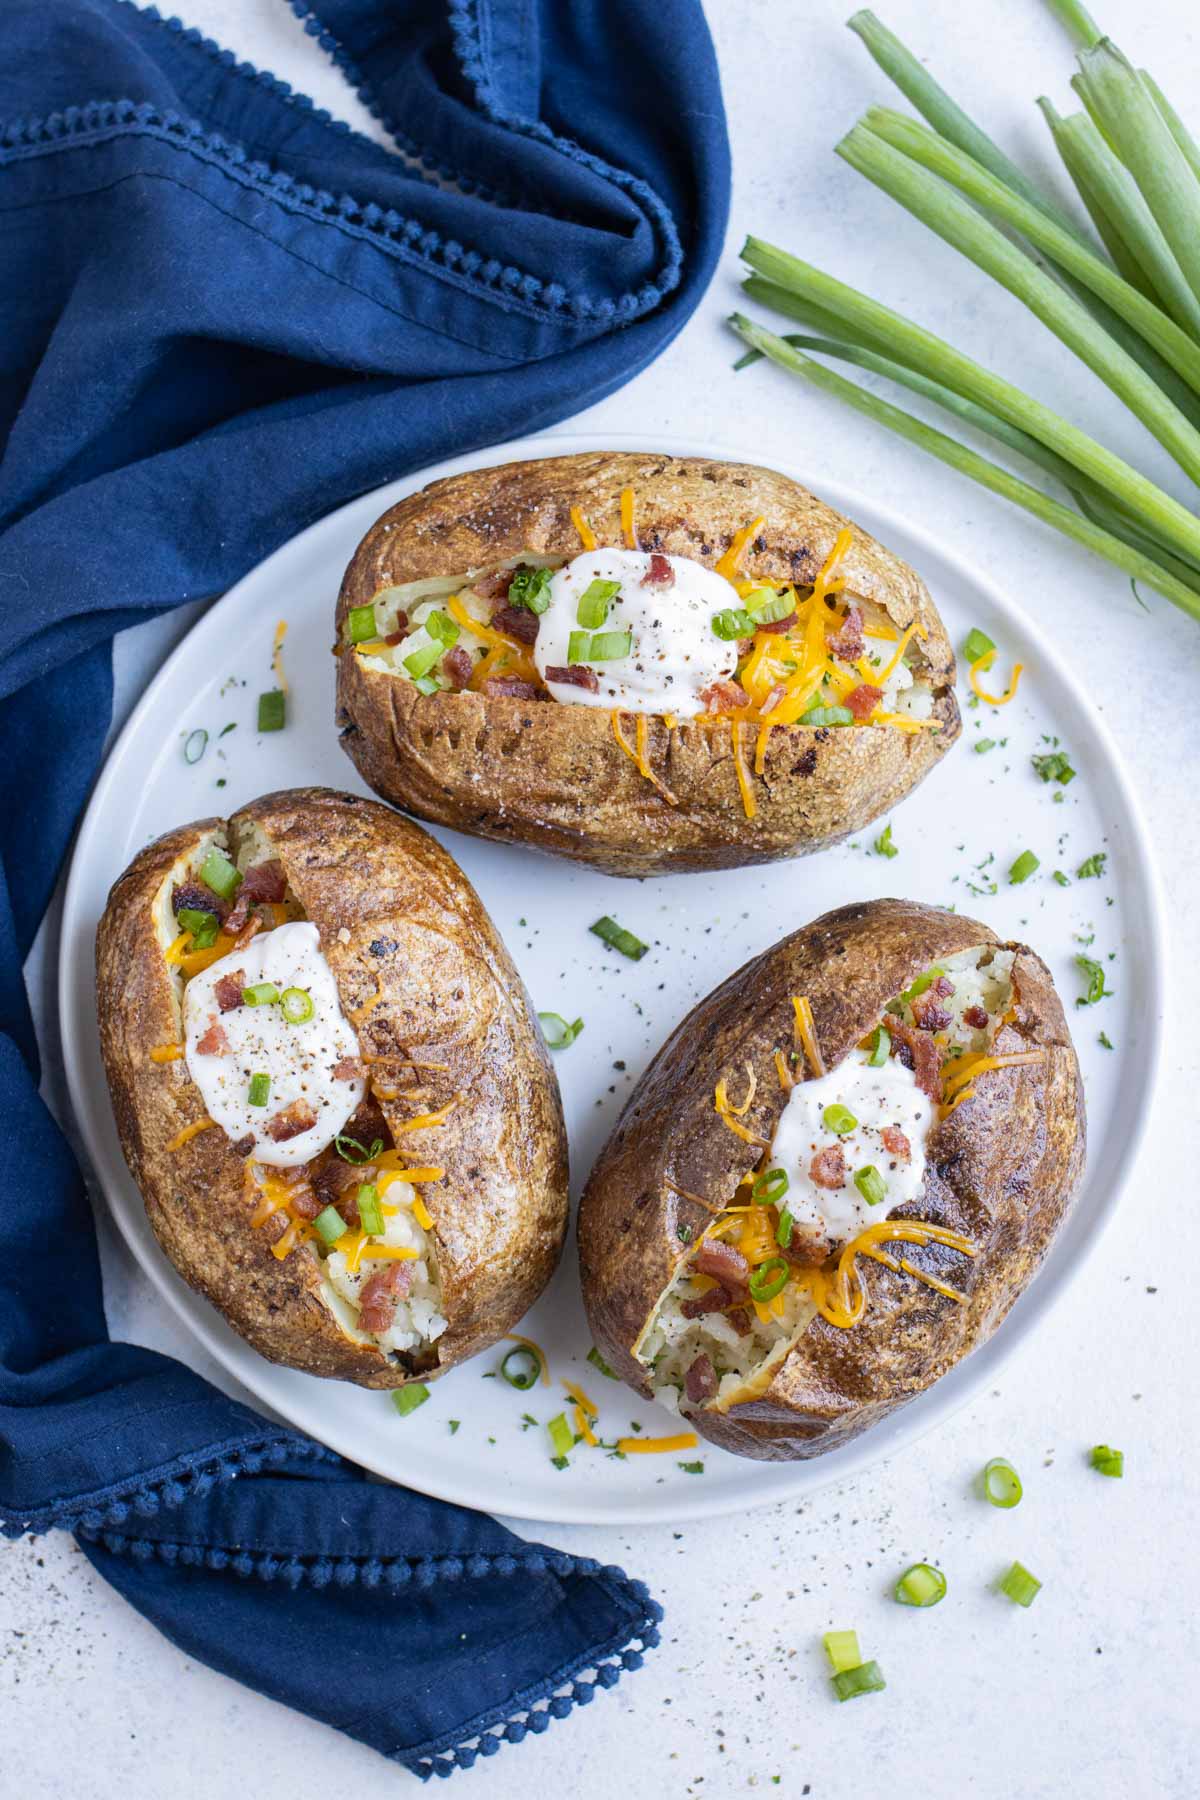 Three baked potatoes are on a plate with a blue napkin.